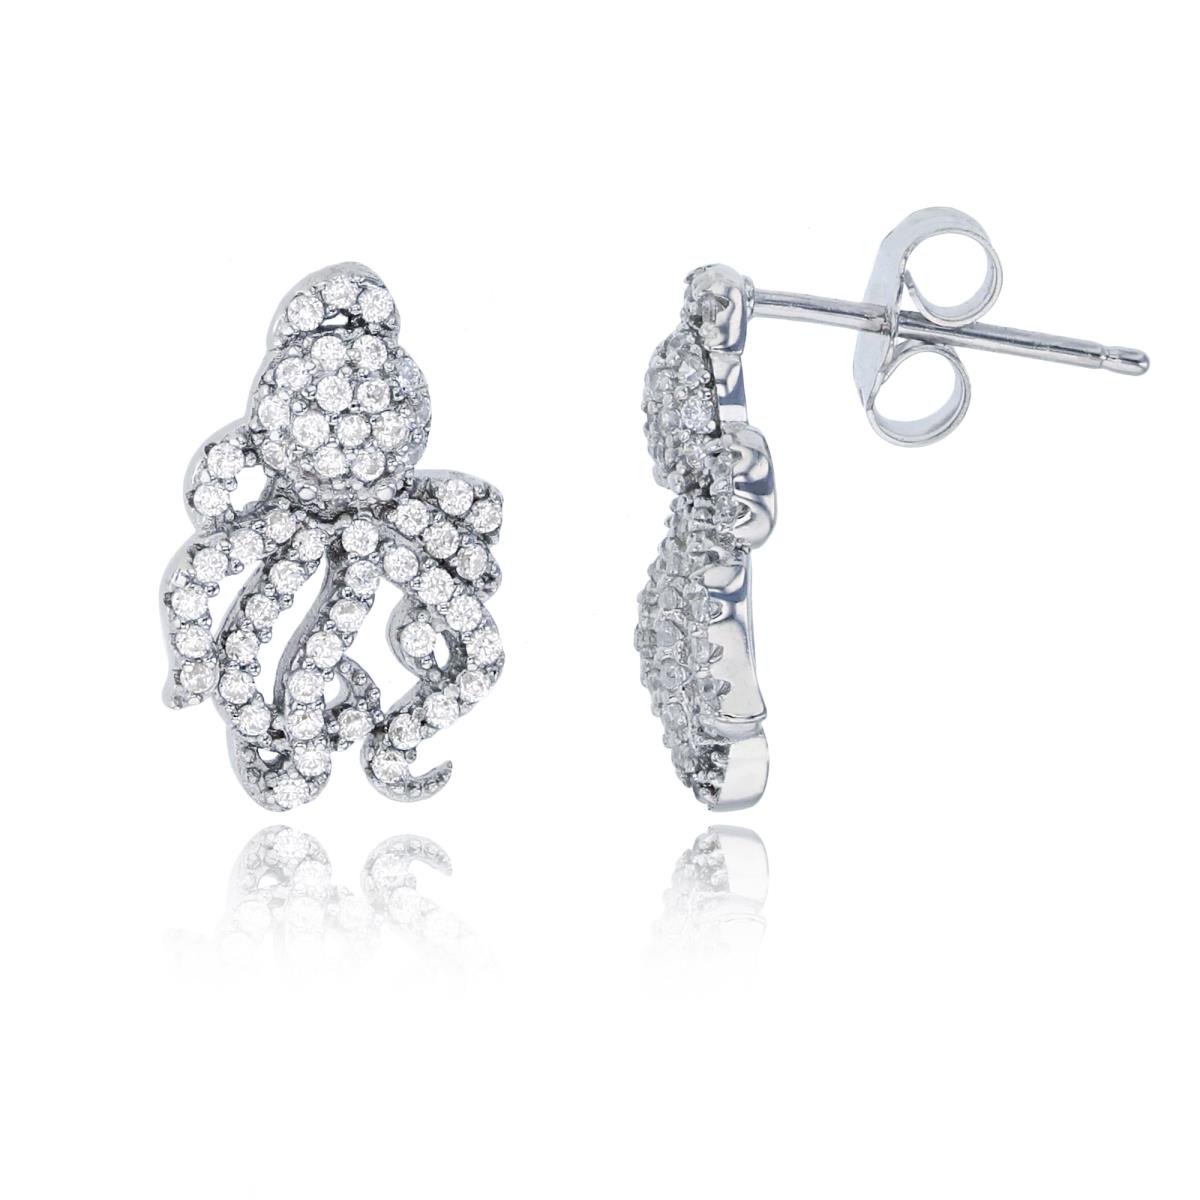 Sterling Silver Rhodium Micropave Octopus Stud Earring